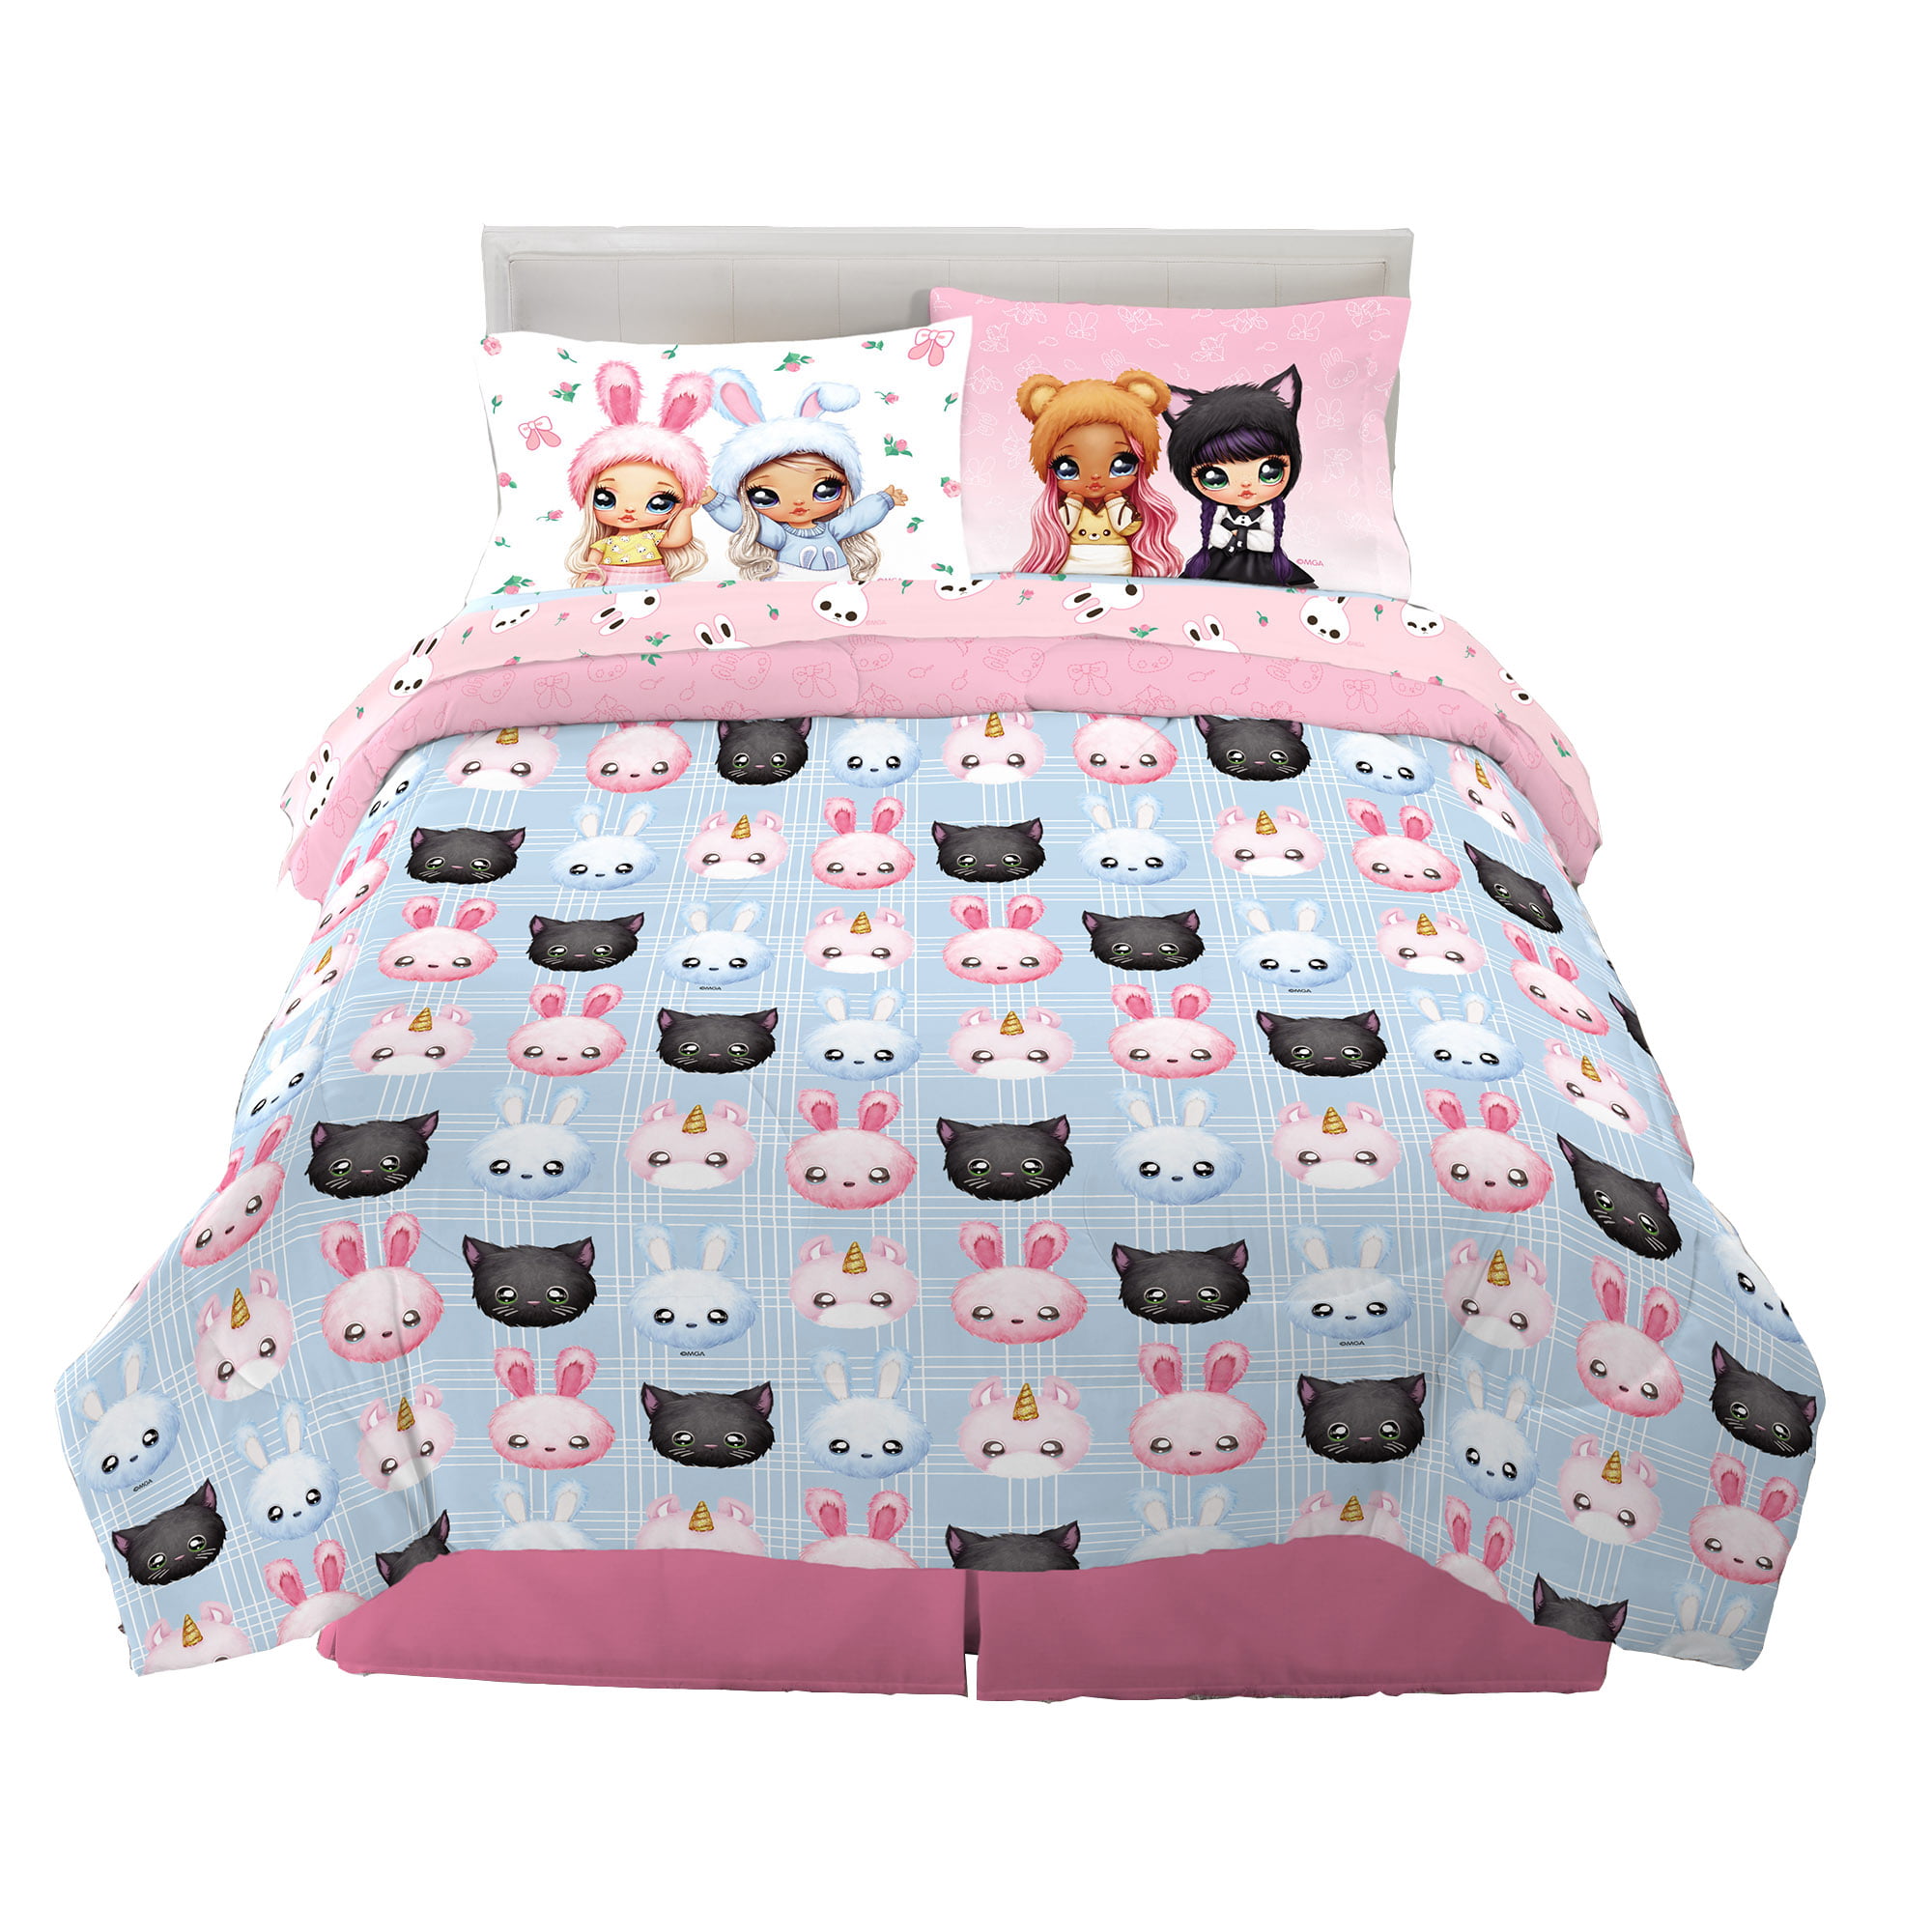 LOL Surprise Kids Twin Bed in a Bag, Comforter and Sheets, Pink 